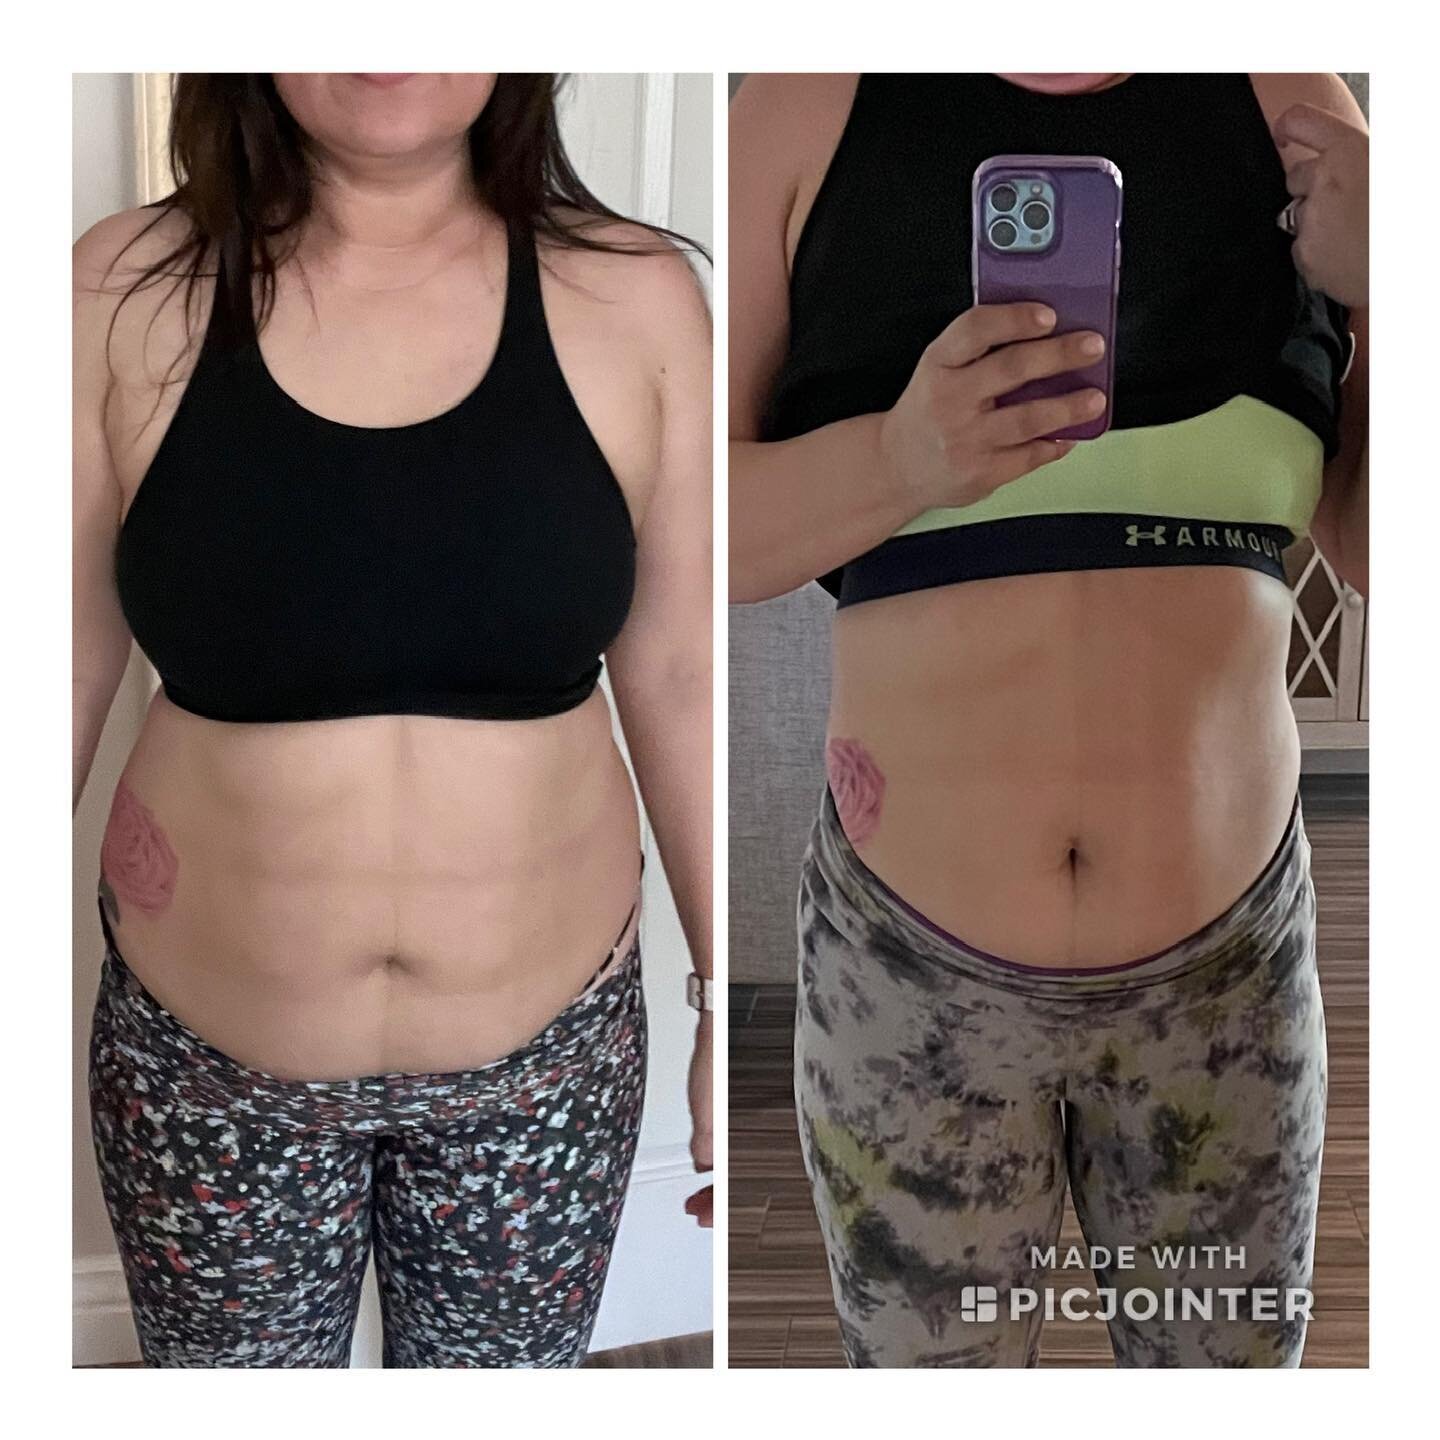 🎉I am so so soooo excited to share some of my Spring challengers experiences with learning all about macros and shifting mindset! Here is one that is just so inspiring! Read what she had to say below! 💖
.
&ldquo;I joined your April - May challenge 